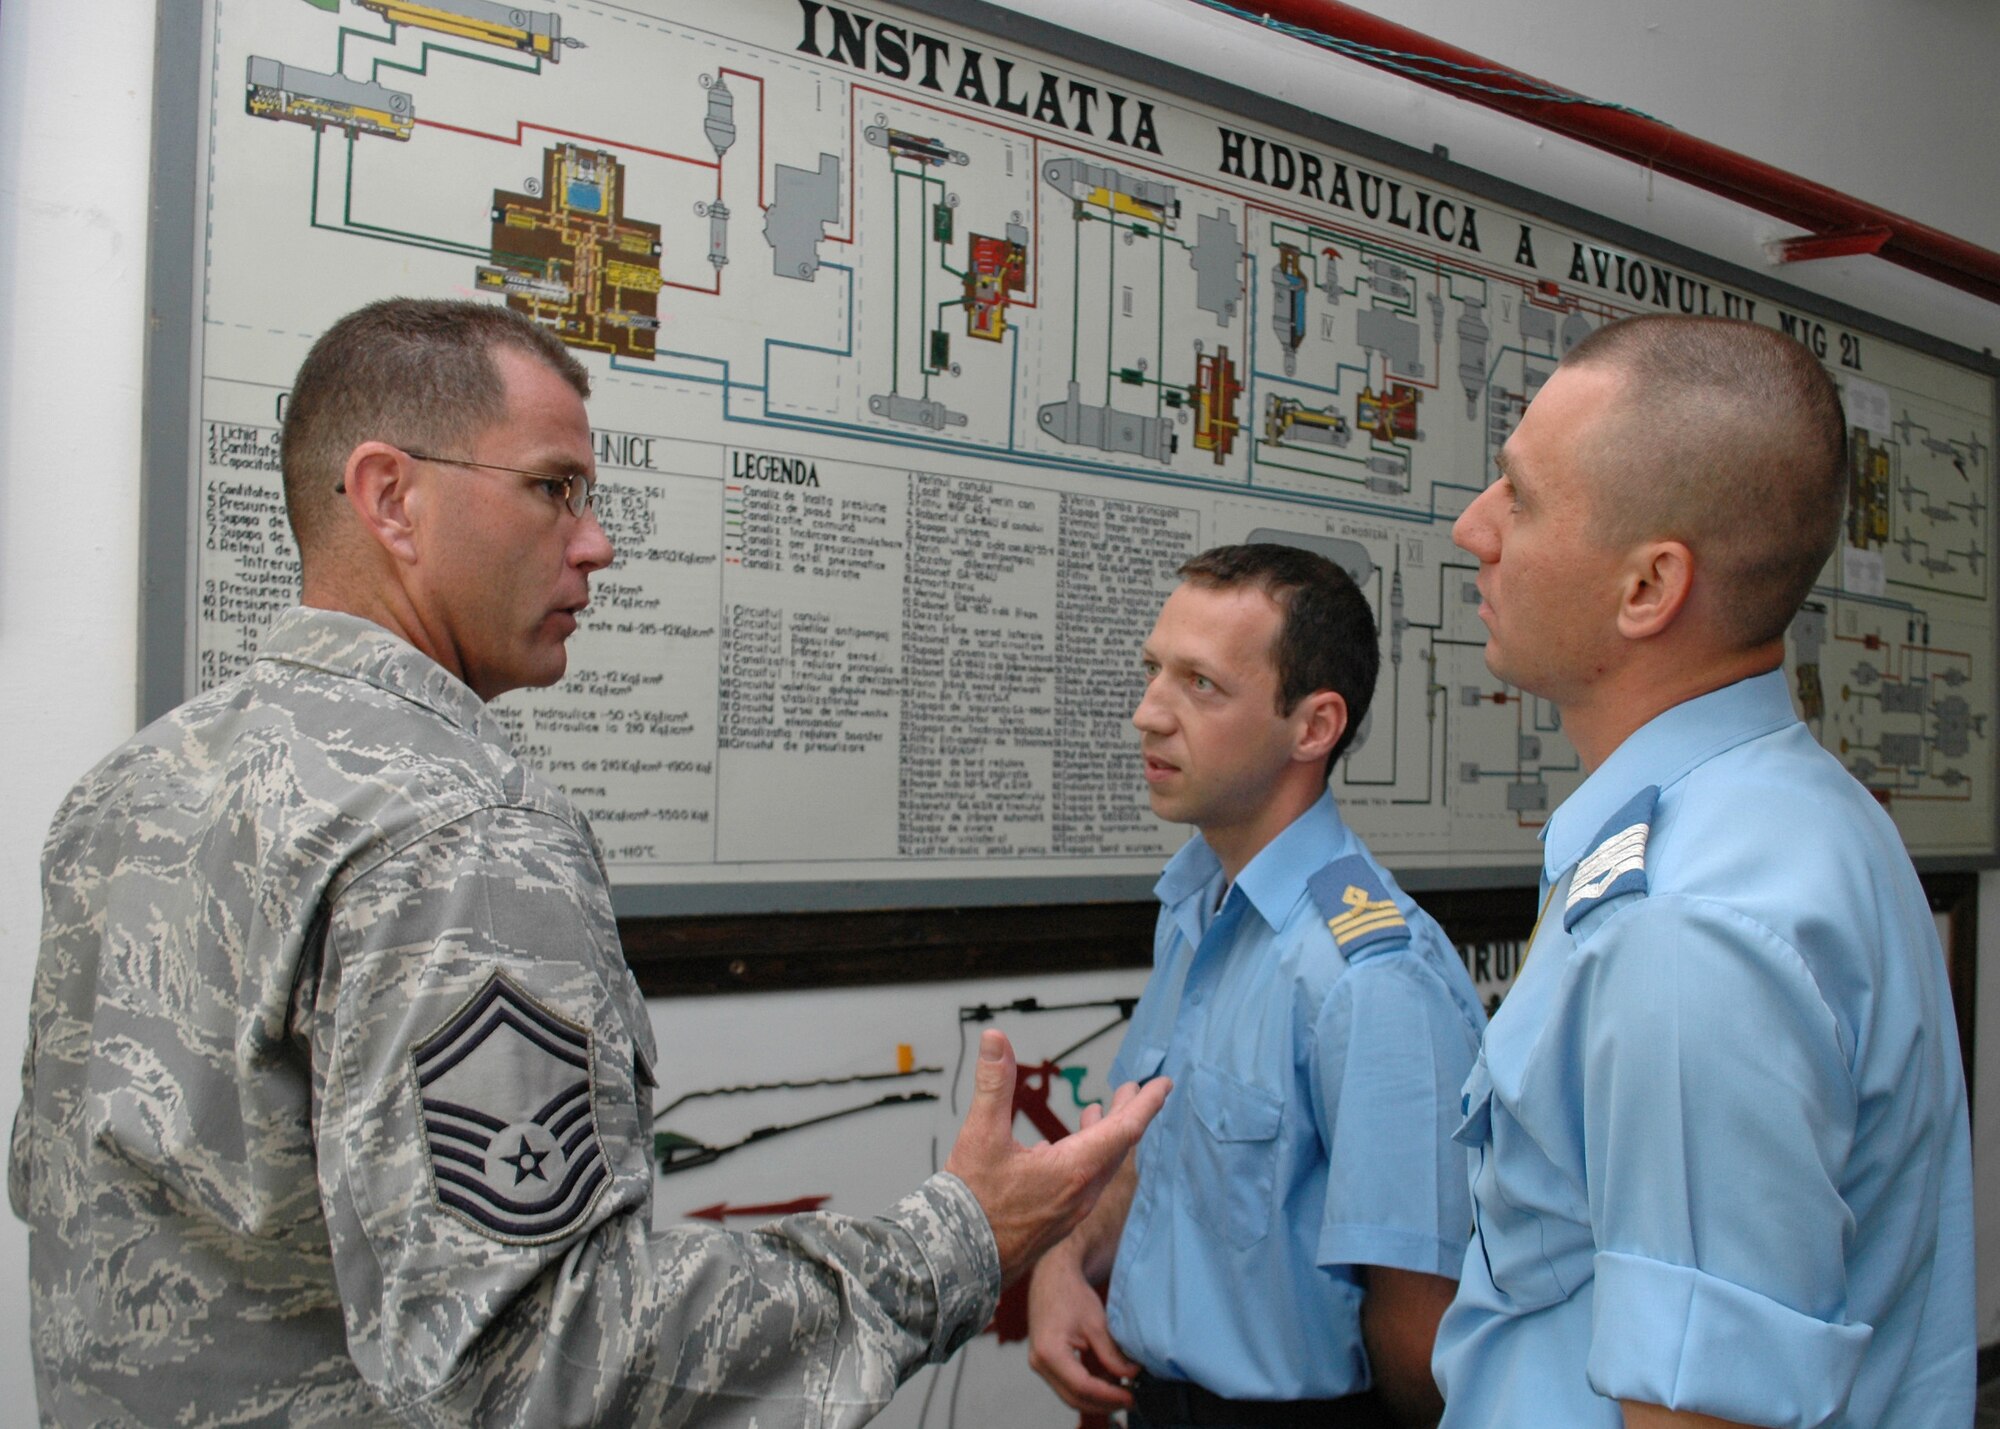 Senior Master Sgt. Timothy Kellner, 31st Maintenance Group quality assurance superintendent, asks Romanian Air Force Warrant Officer Second Class Dima Valentin, (far right), questions about the hydraulic system for the MiG-21 Lancer Aug. 25, 2009.  Sergeant Kellner’s visit to the Traian Vuia Air Force Warrant Officer and NCO Military School in Boboc, Romania, is part of a three-person U.S. Air Forces in Europe Maintenance NCO Training Program Traveling Contact Team who met with RoAF aircraft maintainers and WO and NCO school instructors Aug. 25-28.  (U.S. Air Force photo/Tech. Sgt. Michael O’Connor)